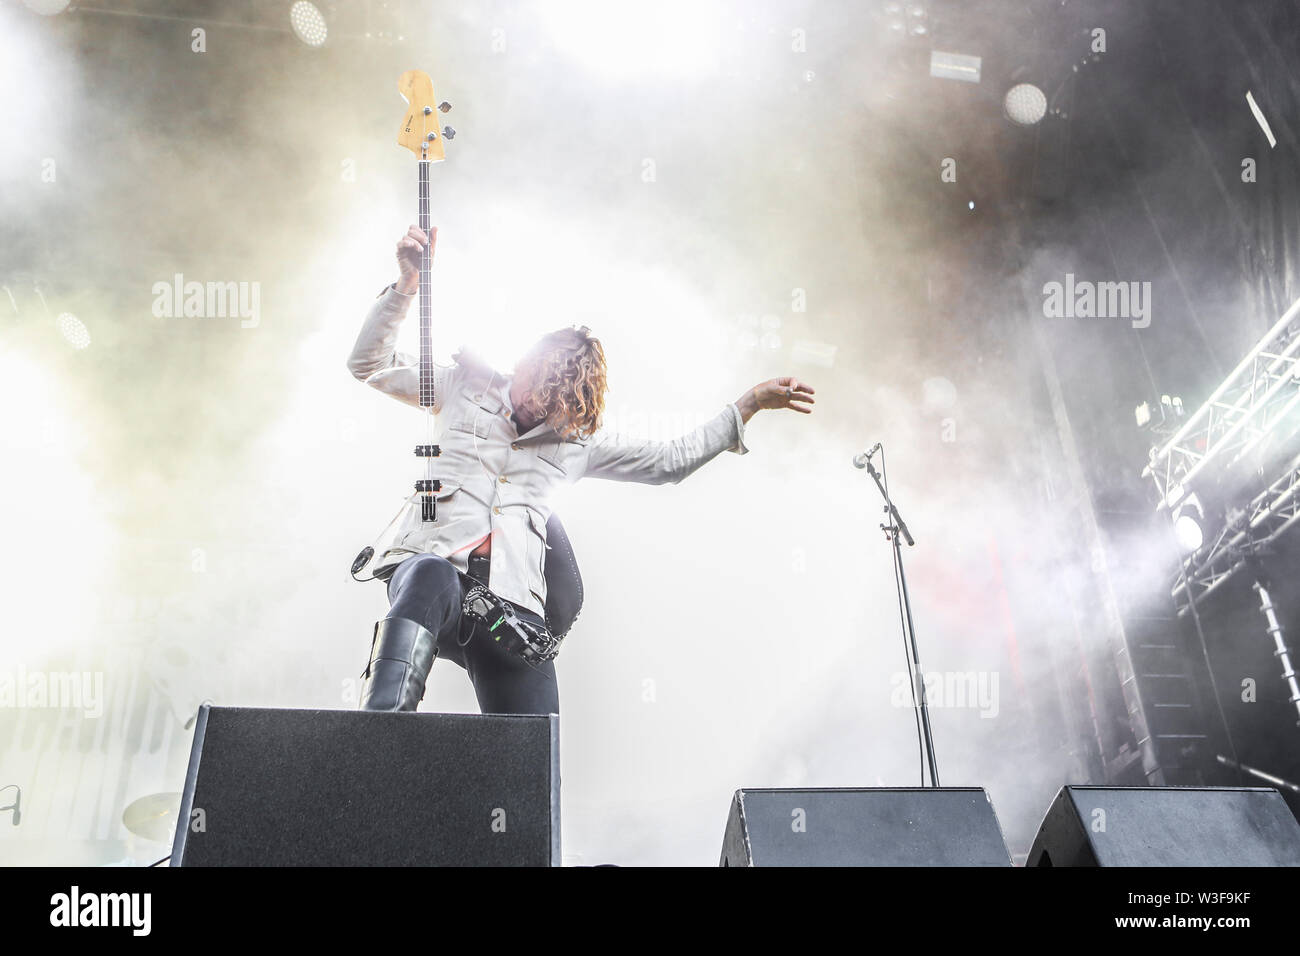 Kvinesdal, Norway - July 11th, 2019. The Danish rock band D-A-D performs a live concert during the Norwegian music festival Norway Rock Festival 2019. Here bass player Stig Pedersen is seen live on stage. (Photo credit: Gonzales Photo - Synne Nilsson). Stock Photo